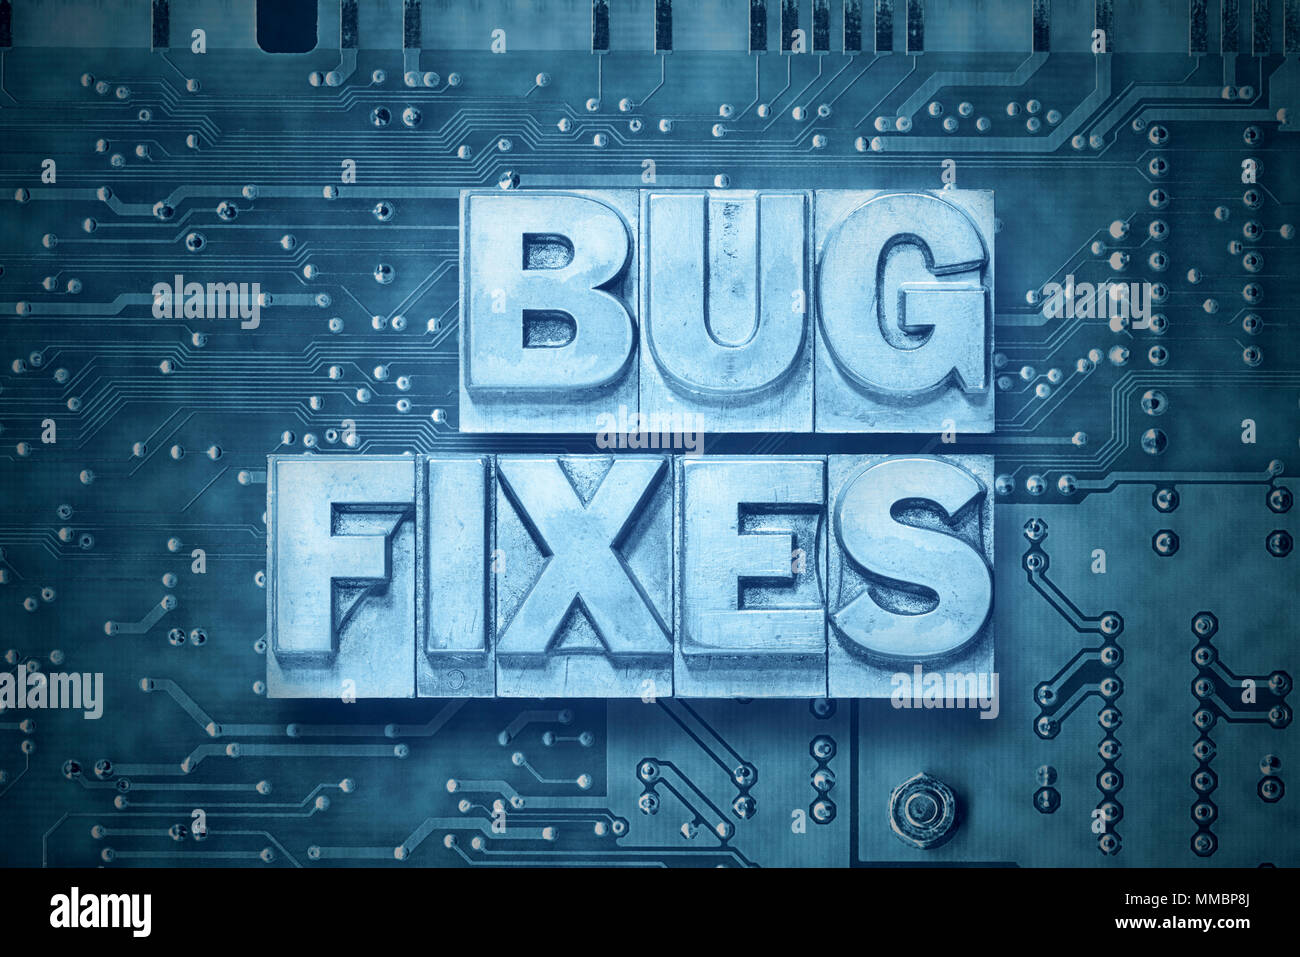 bug fixes phrase made from metallic letterpress blocks on pc board background Stock Photo